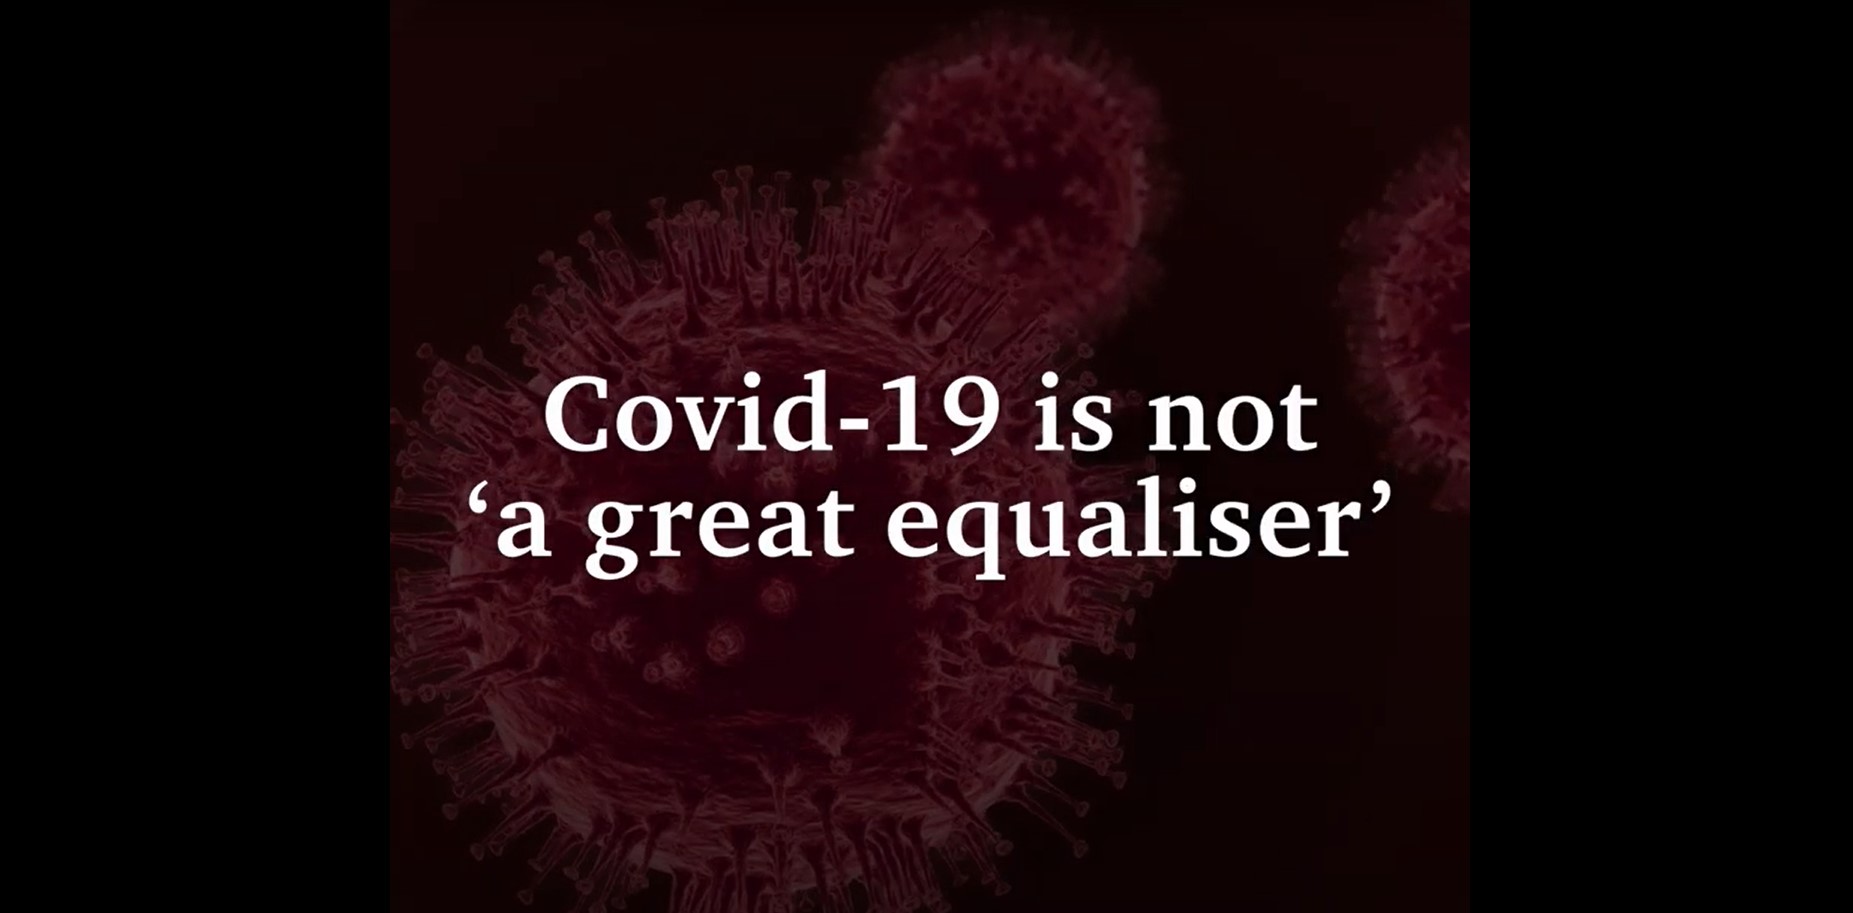 Covid-19 is not 'a great equalizer'